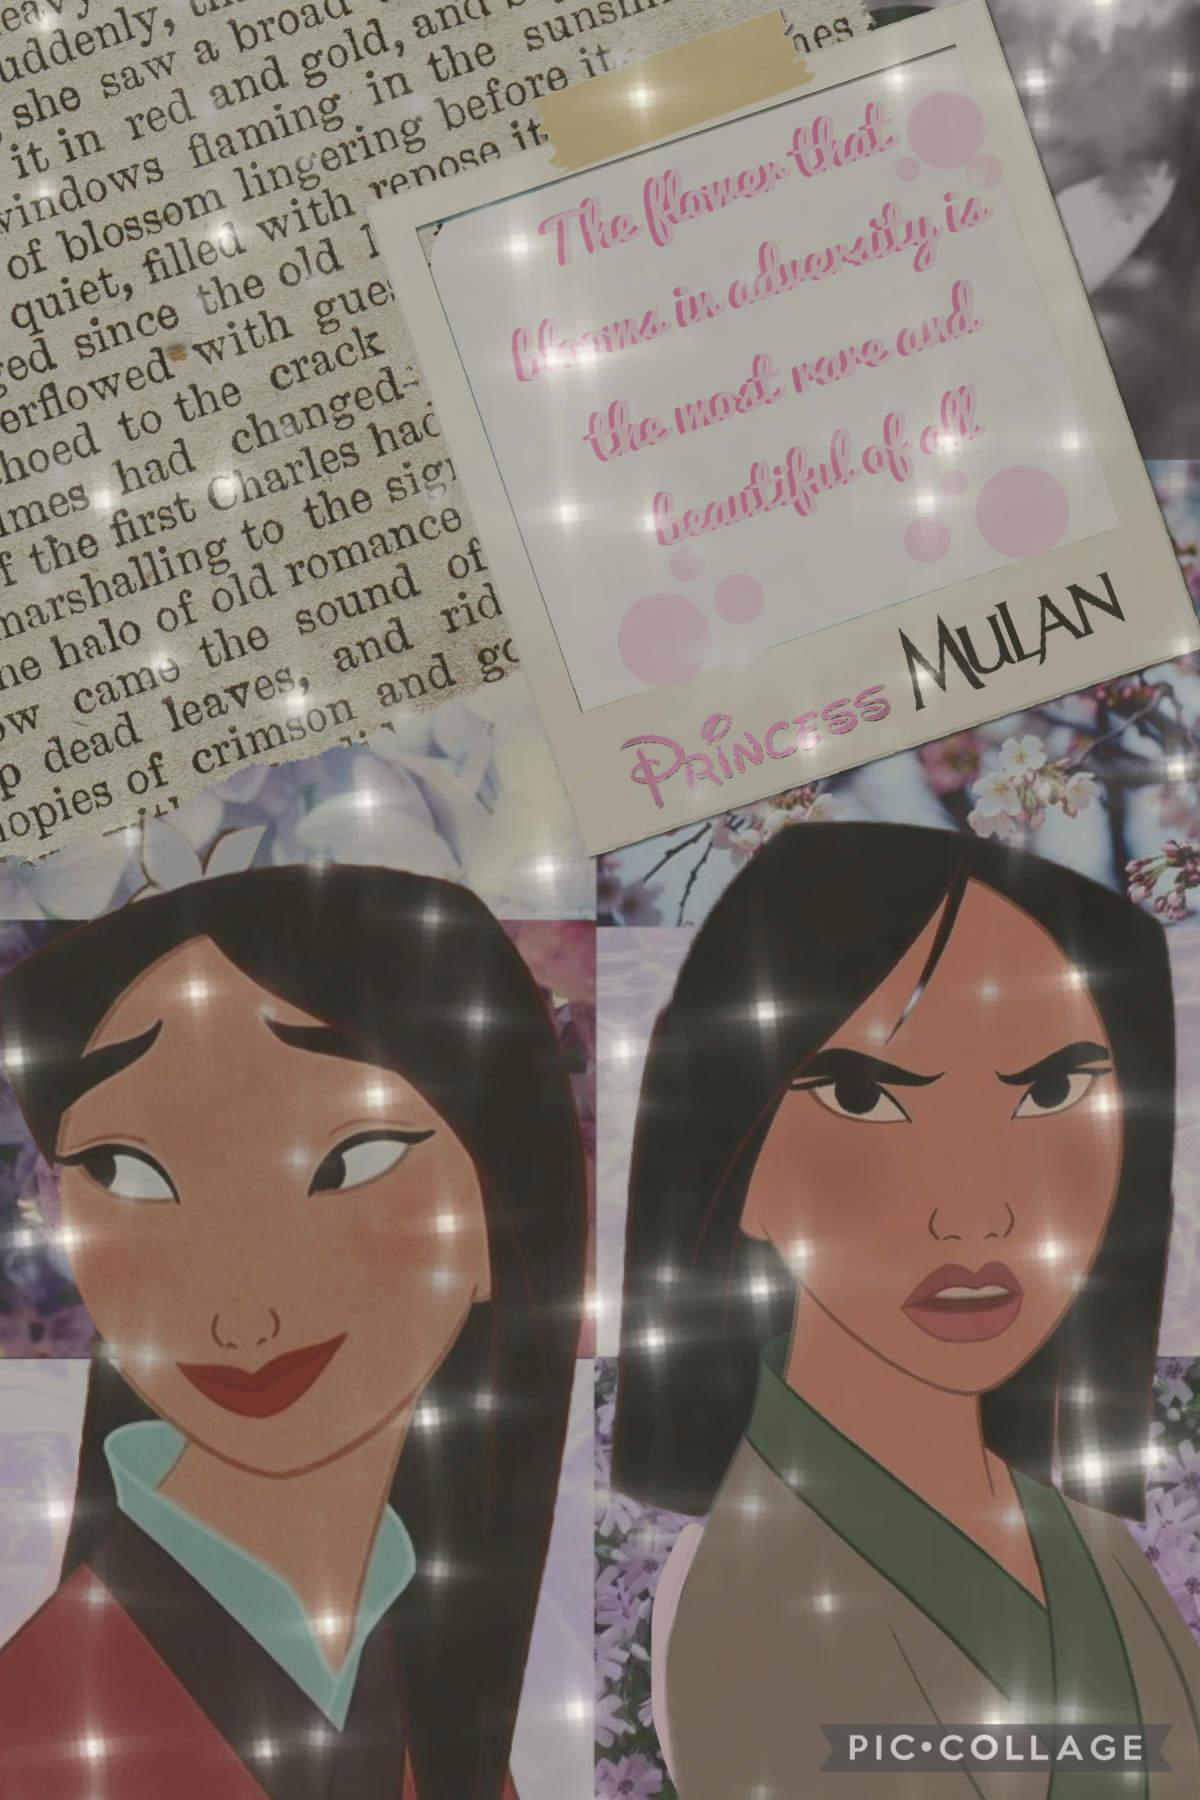 Disney collage #2 (tap) 
Princess Mulan 
“The flower that blooms in adversity is the most rare and beautiful of all” ❤️✨